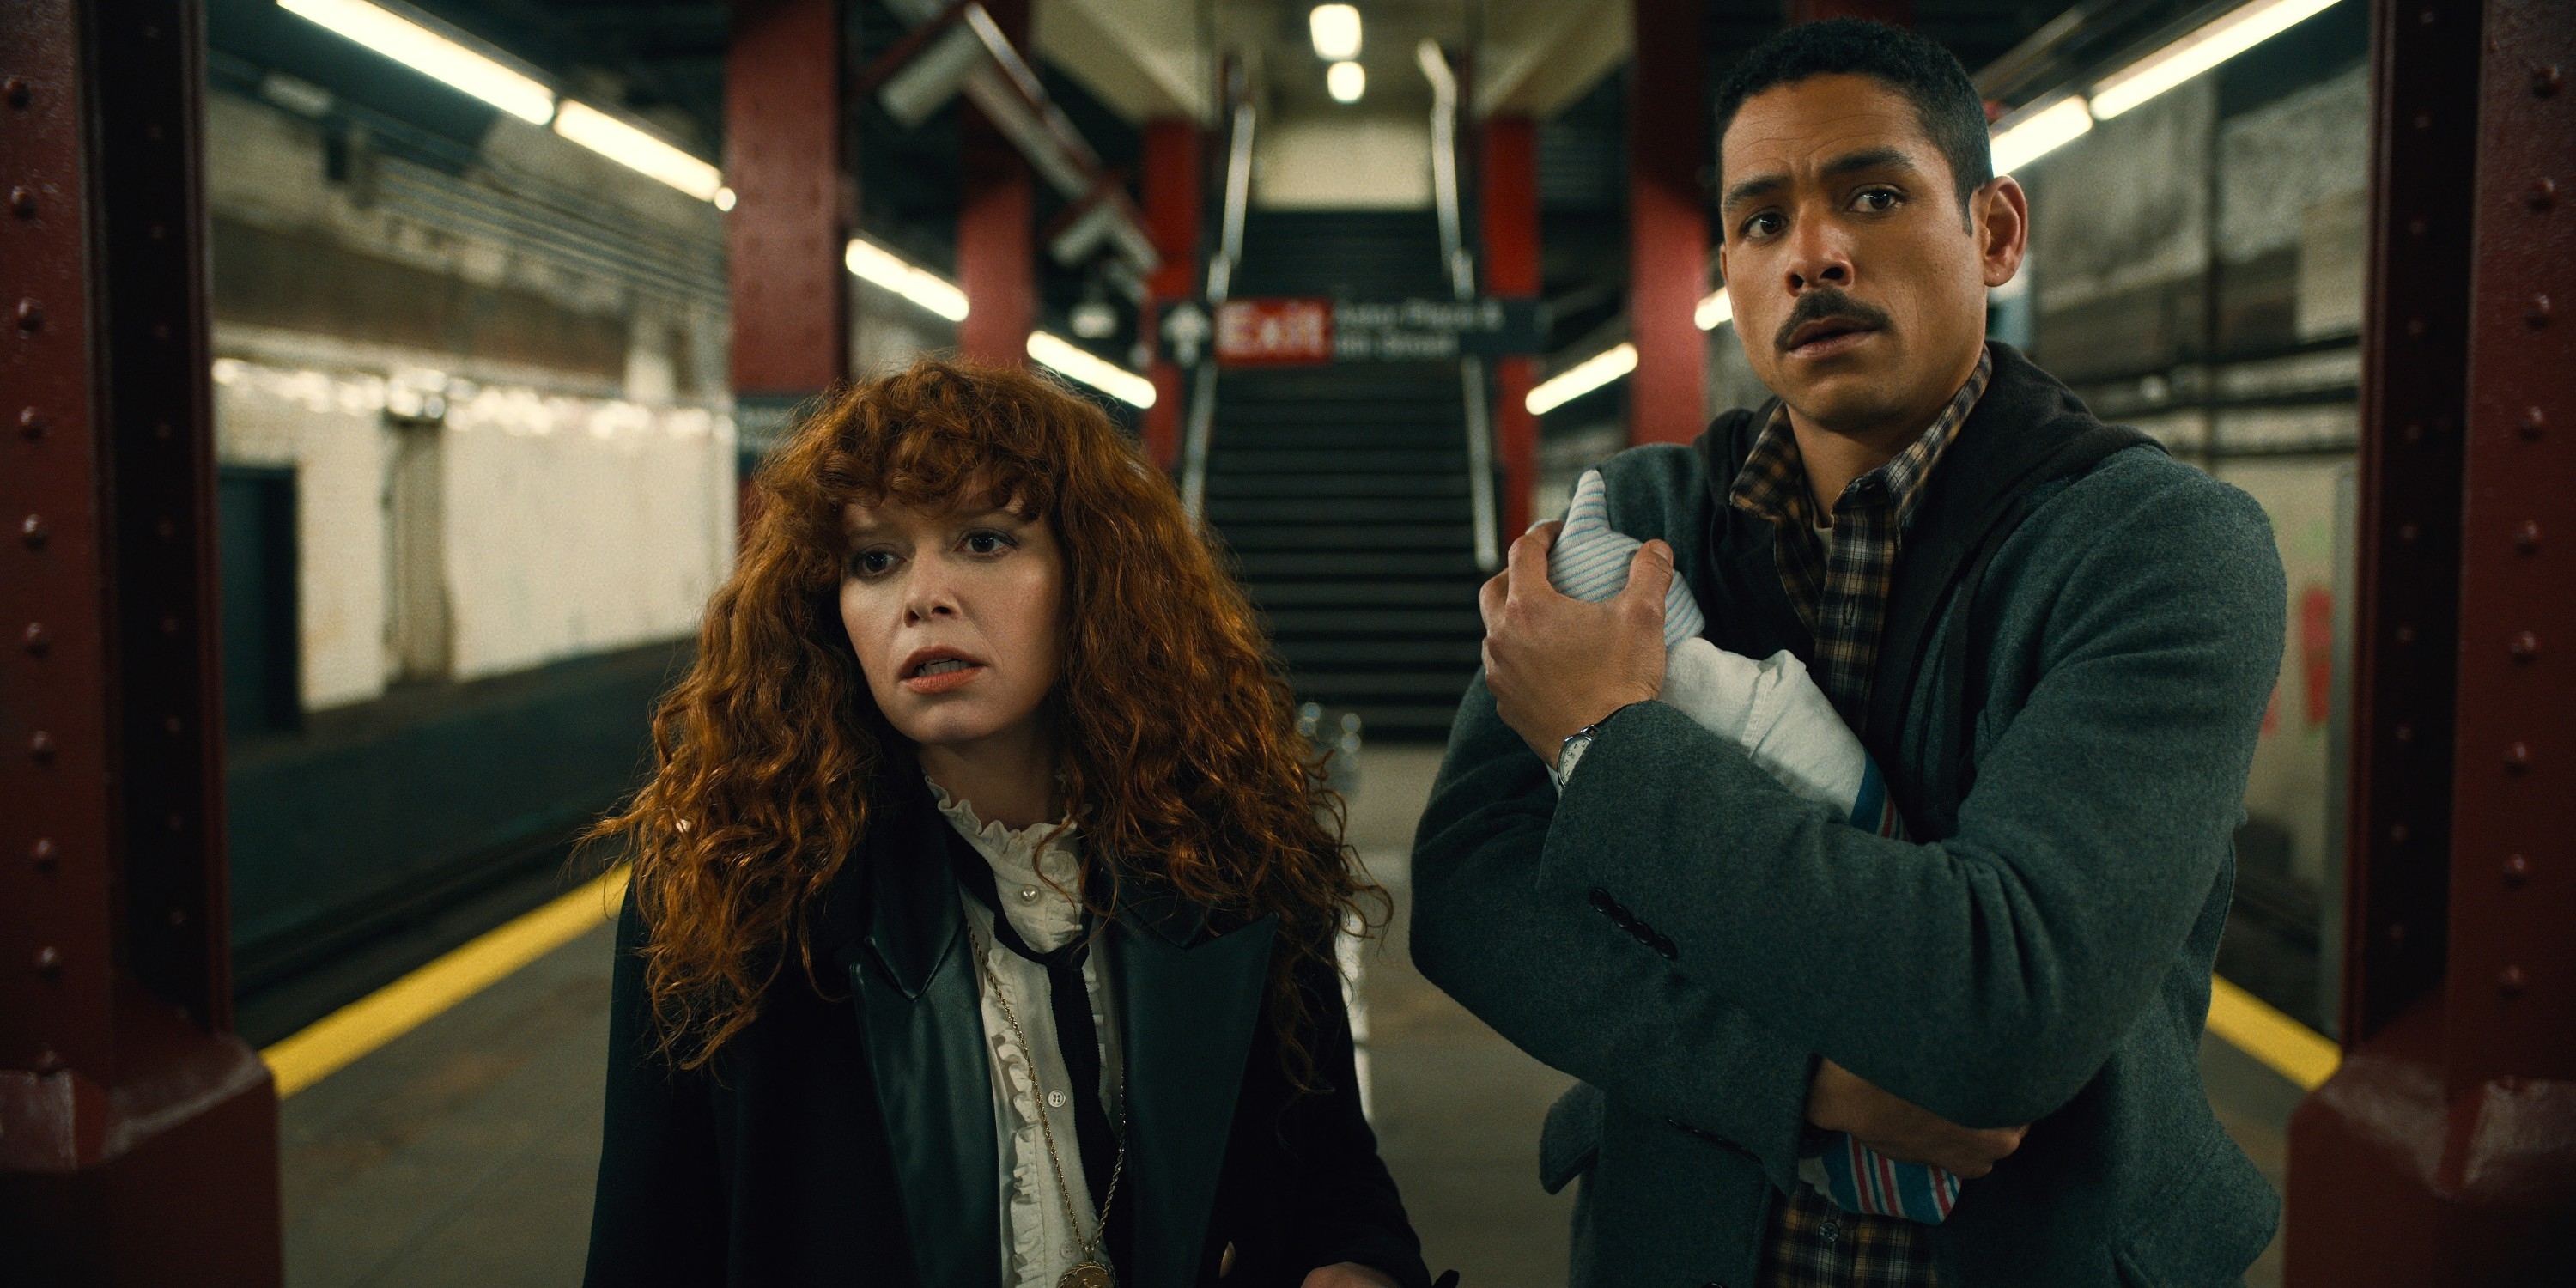 Nadia standing next to a man holding a baby on a subway platform in a scene from &quot;Russian Doll&quot;